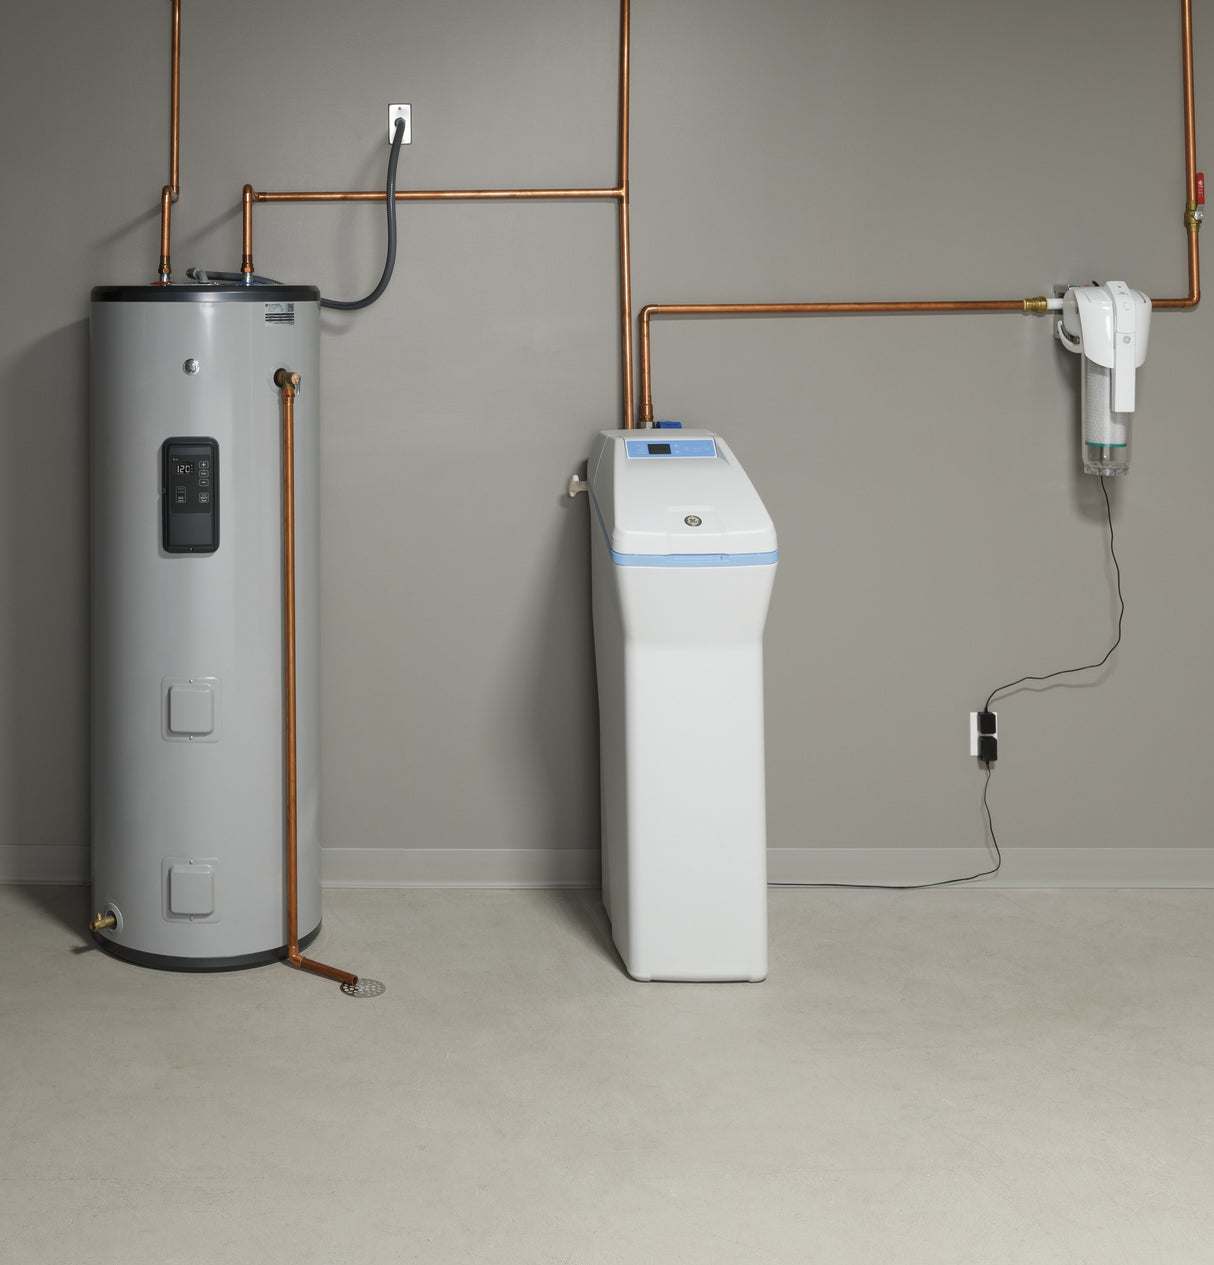 GE(R) Smart 50 Gallon Tall Electric Water Heater - (GE50T10BLM)